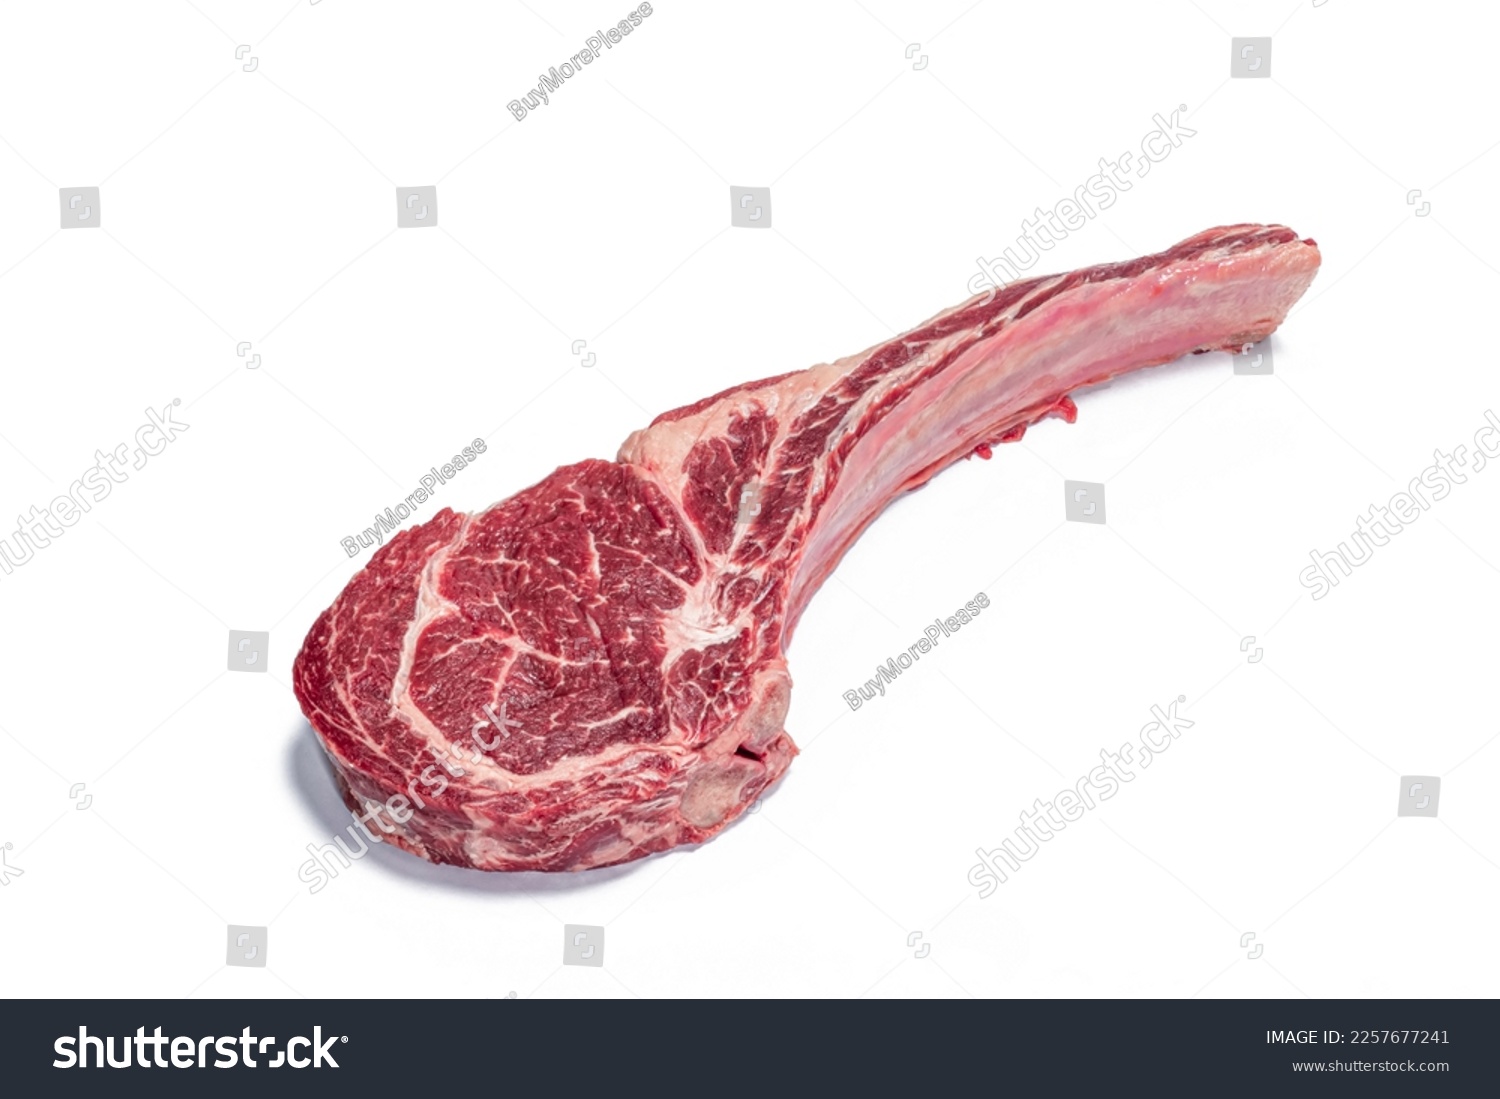 tomahawk angus in high res. image and isolated in white #2257677241